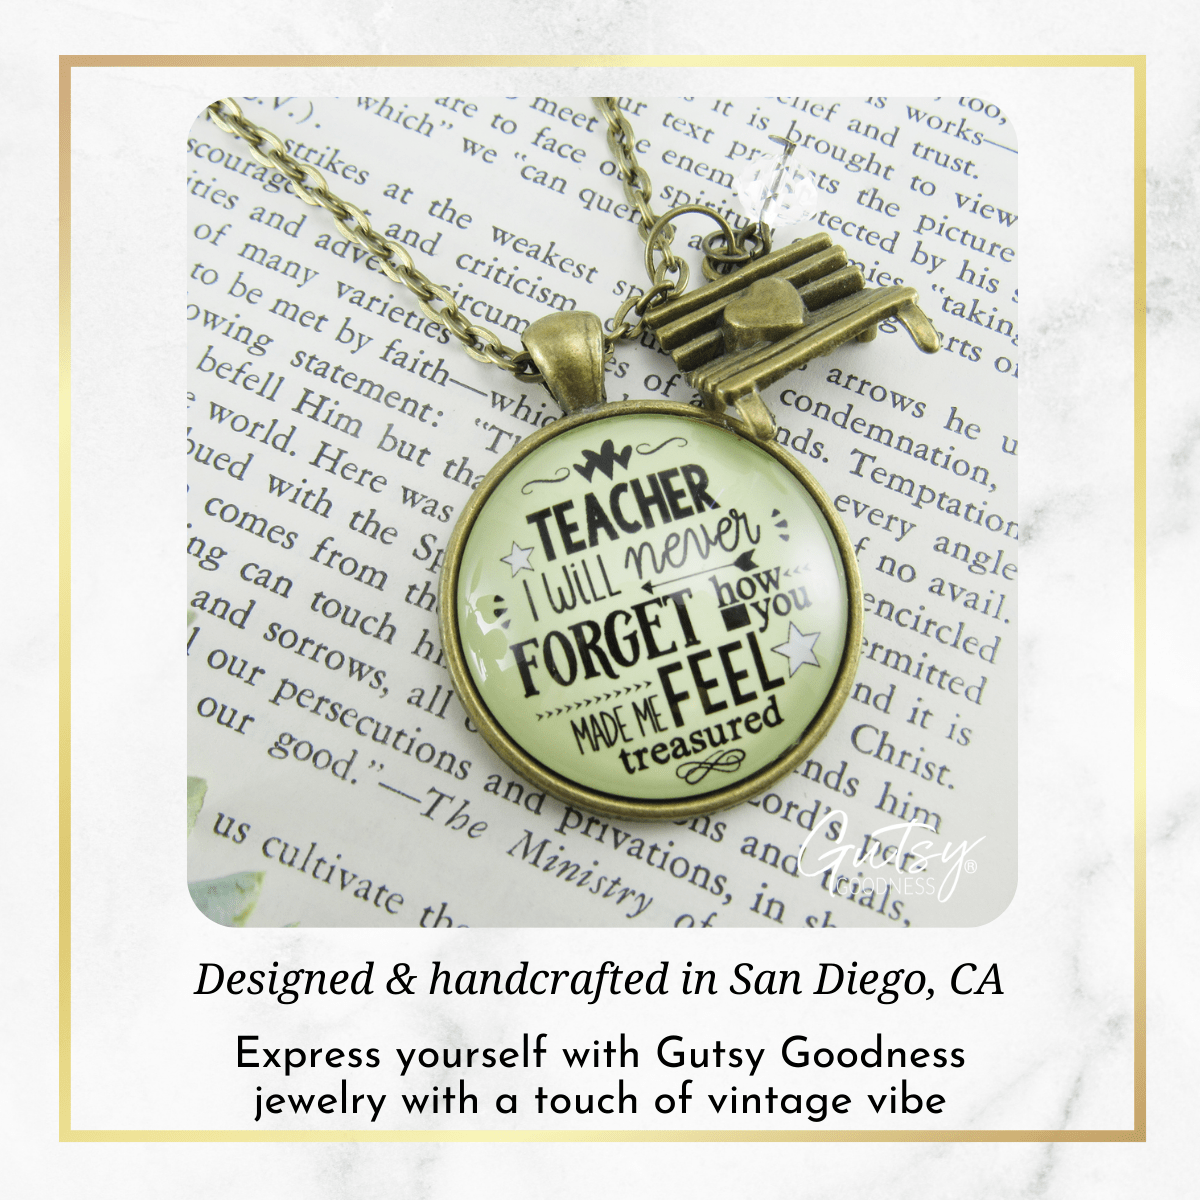 Gutsy Goodness Teacher Necklace I Will Never Forget Jewelry Appreciation Gift - Gutsy Goodness Handmade Jewelry;Teacher Necklace I Will Never Forget Jewelry Appreciation Gift - Gutsy Goodness Handmade Jewelry Gifts